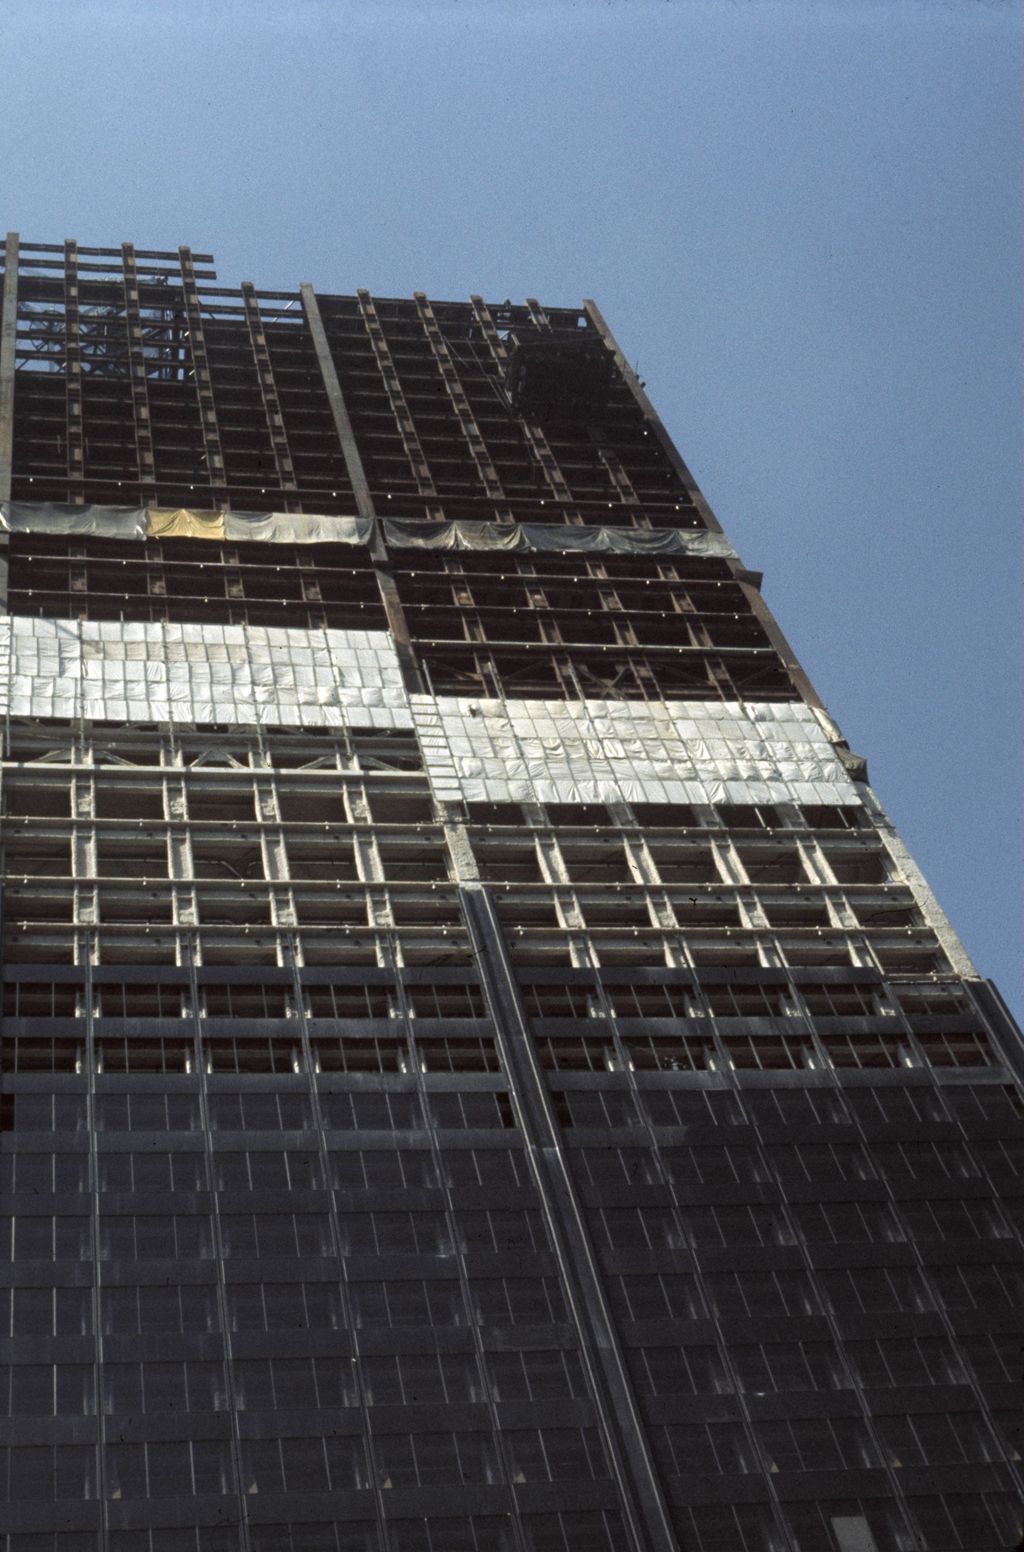 Sear Tower during construction